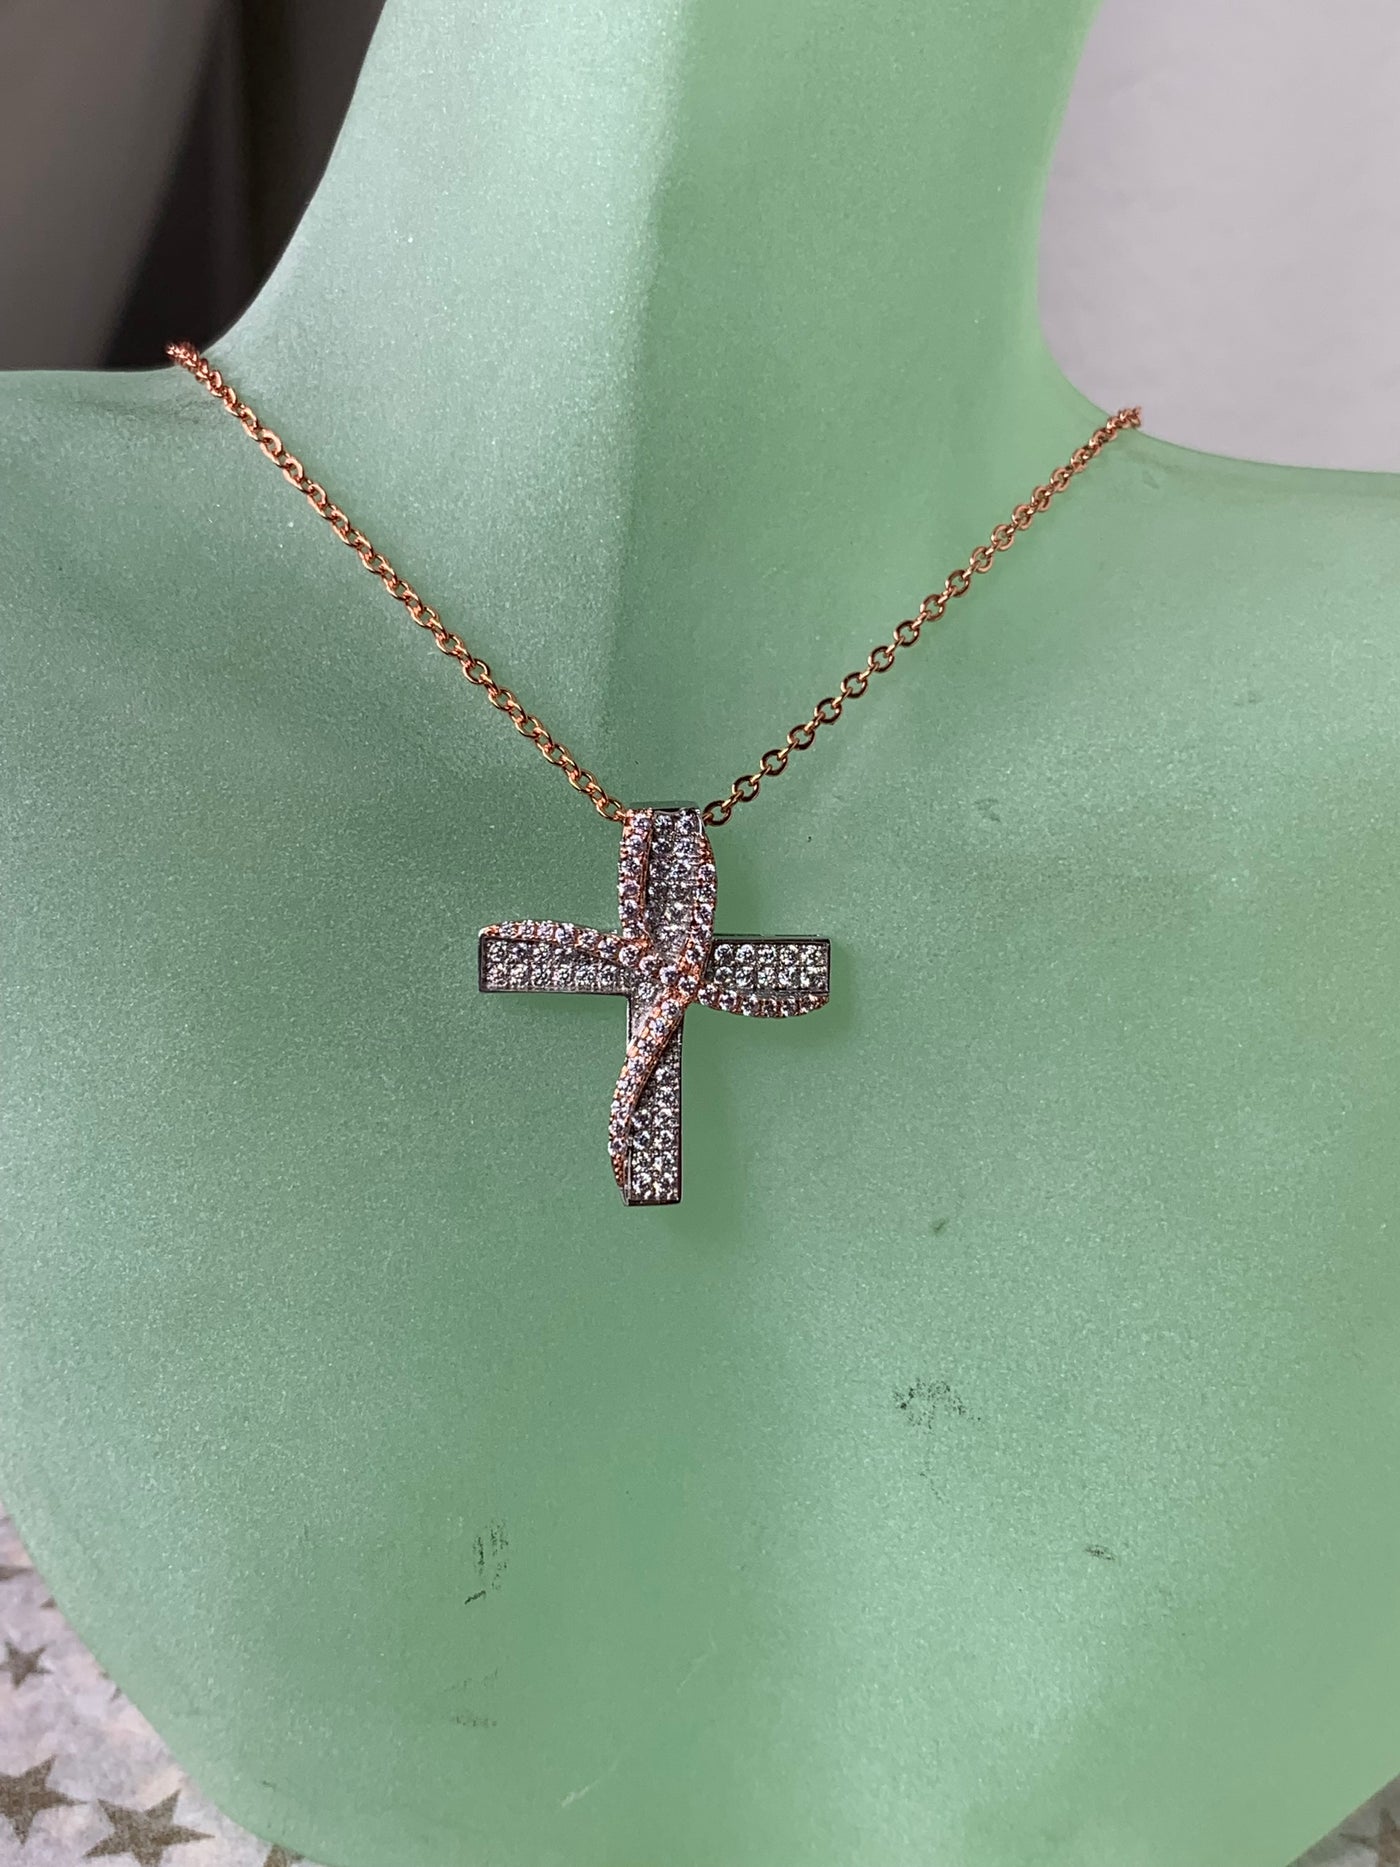 Rose Gold Tone Cross Pendant with Pave Set Cubic Zirconia